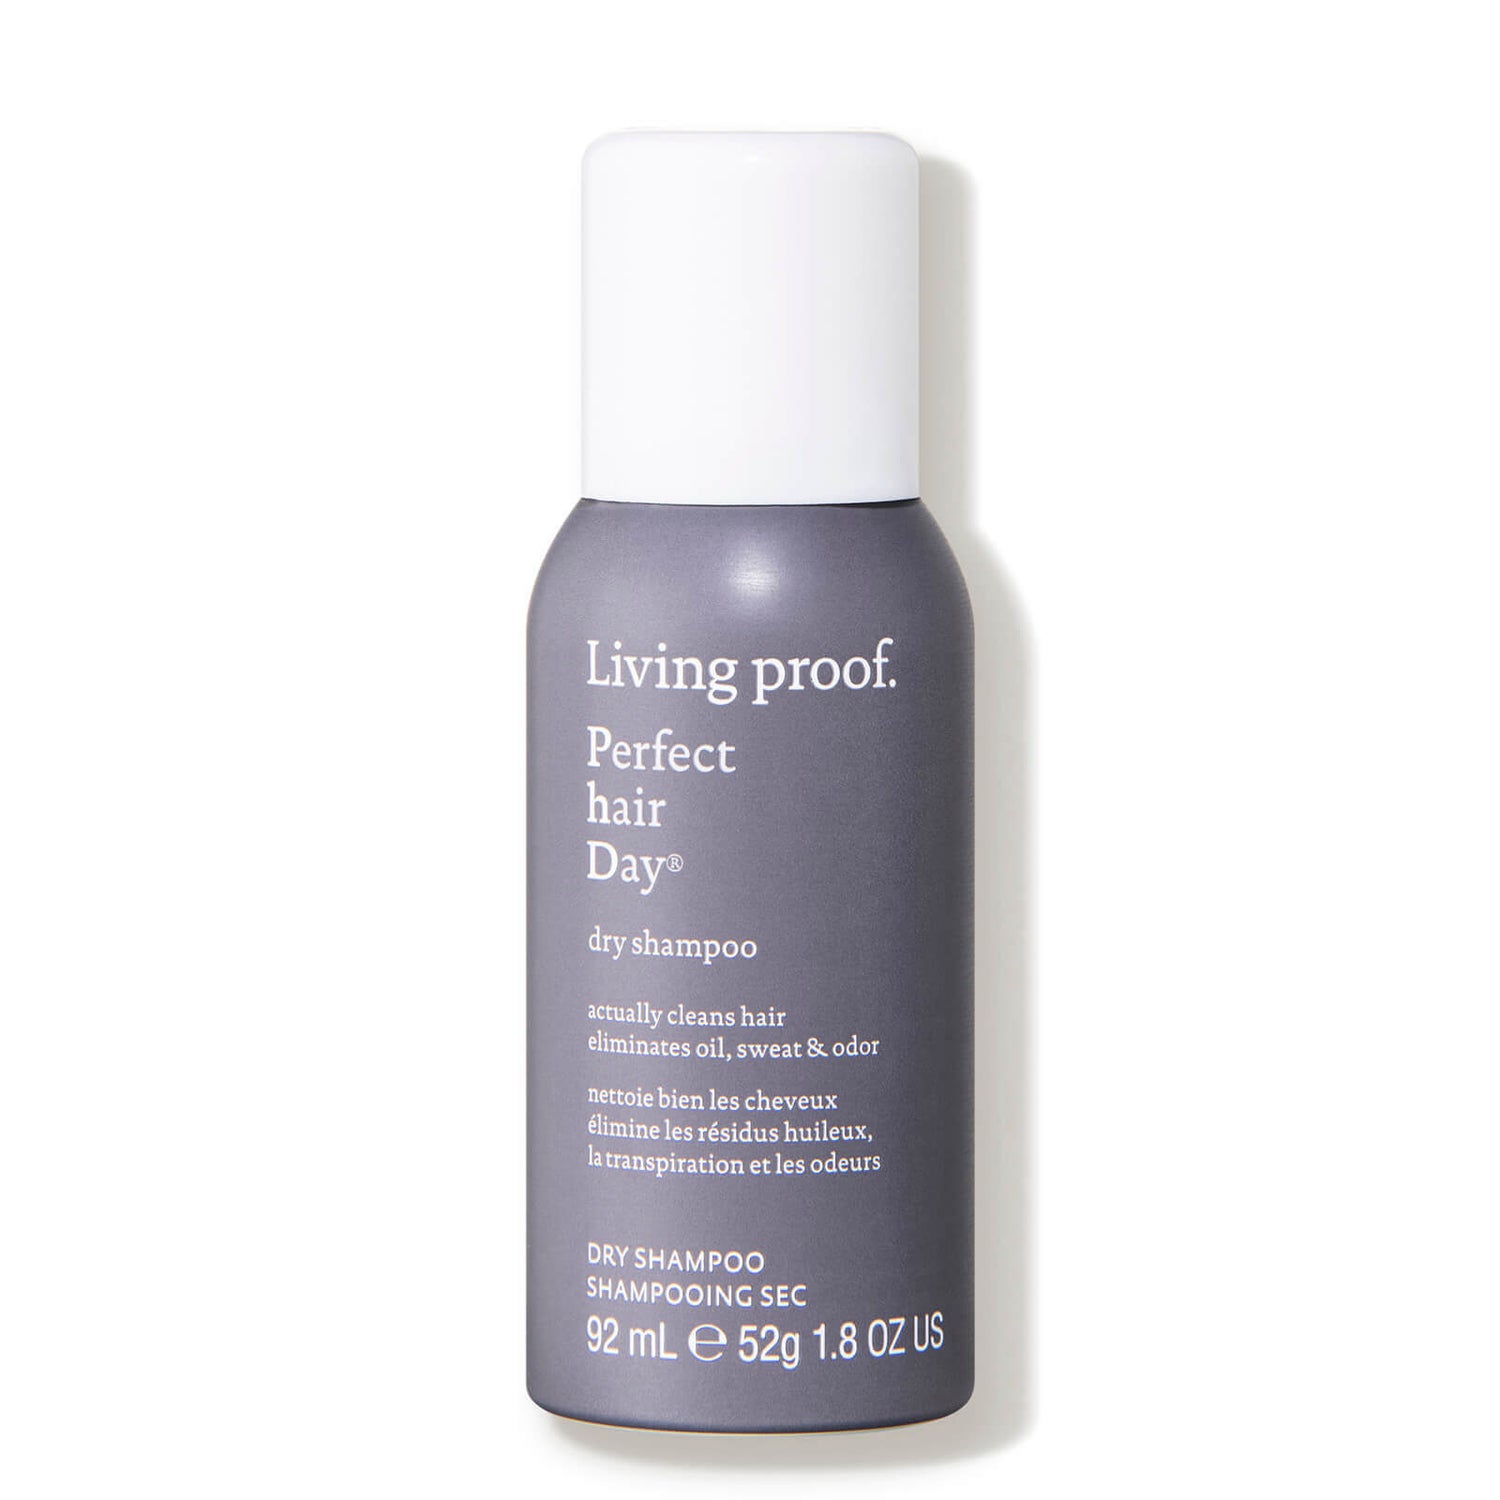 Living Proof Perfect hair Day Dry Shampoo (1.8 oz.)